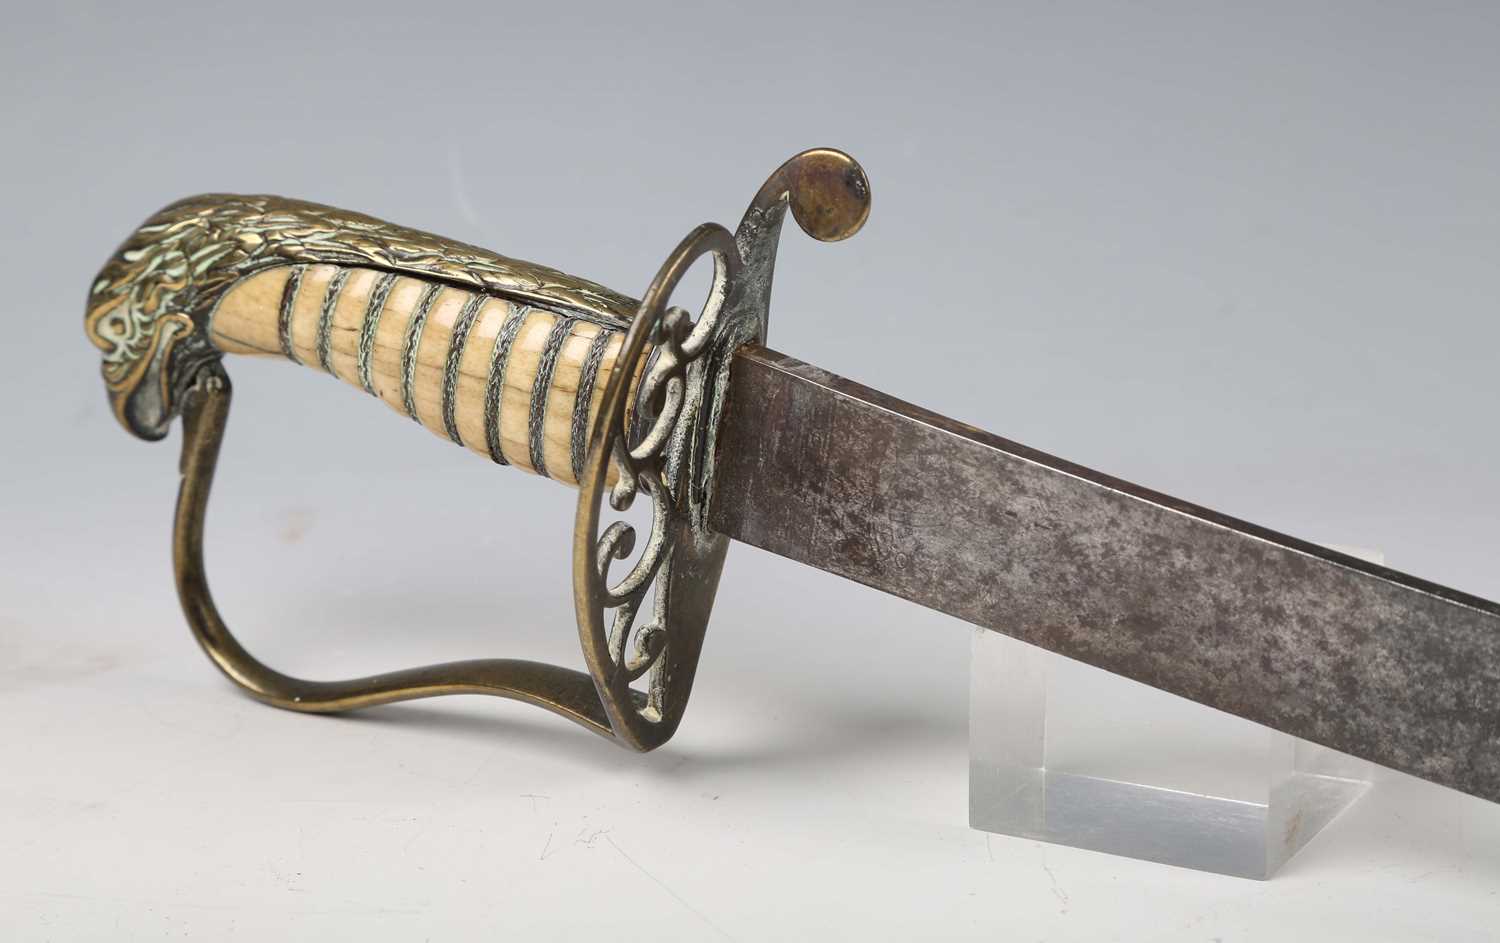 An early 19th century officer's dress sword, possibly of American origin, with curved single-edged